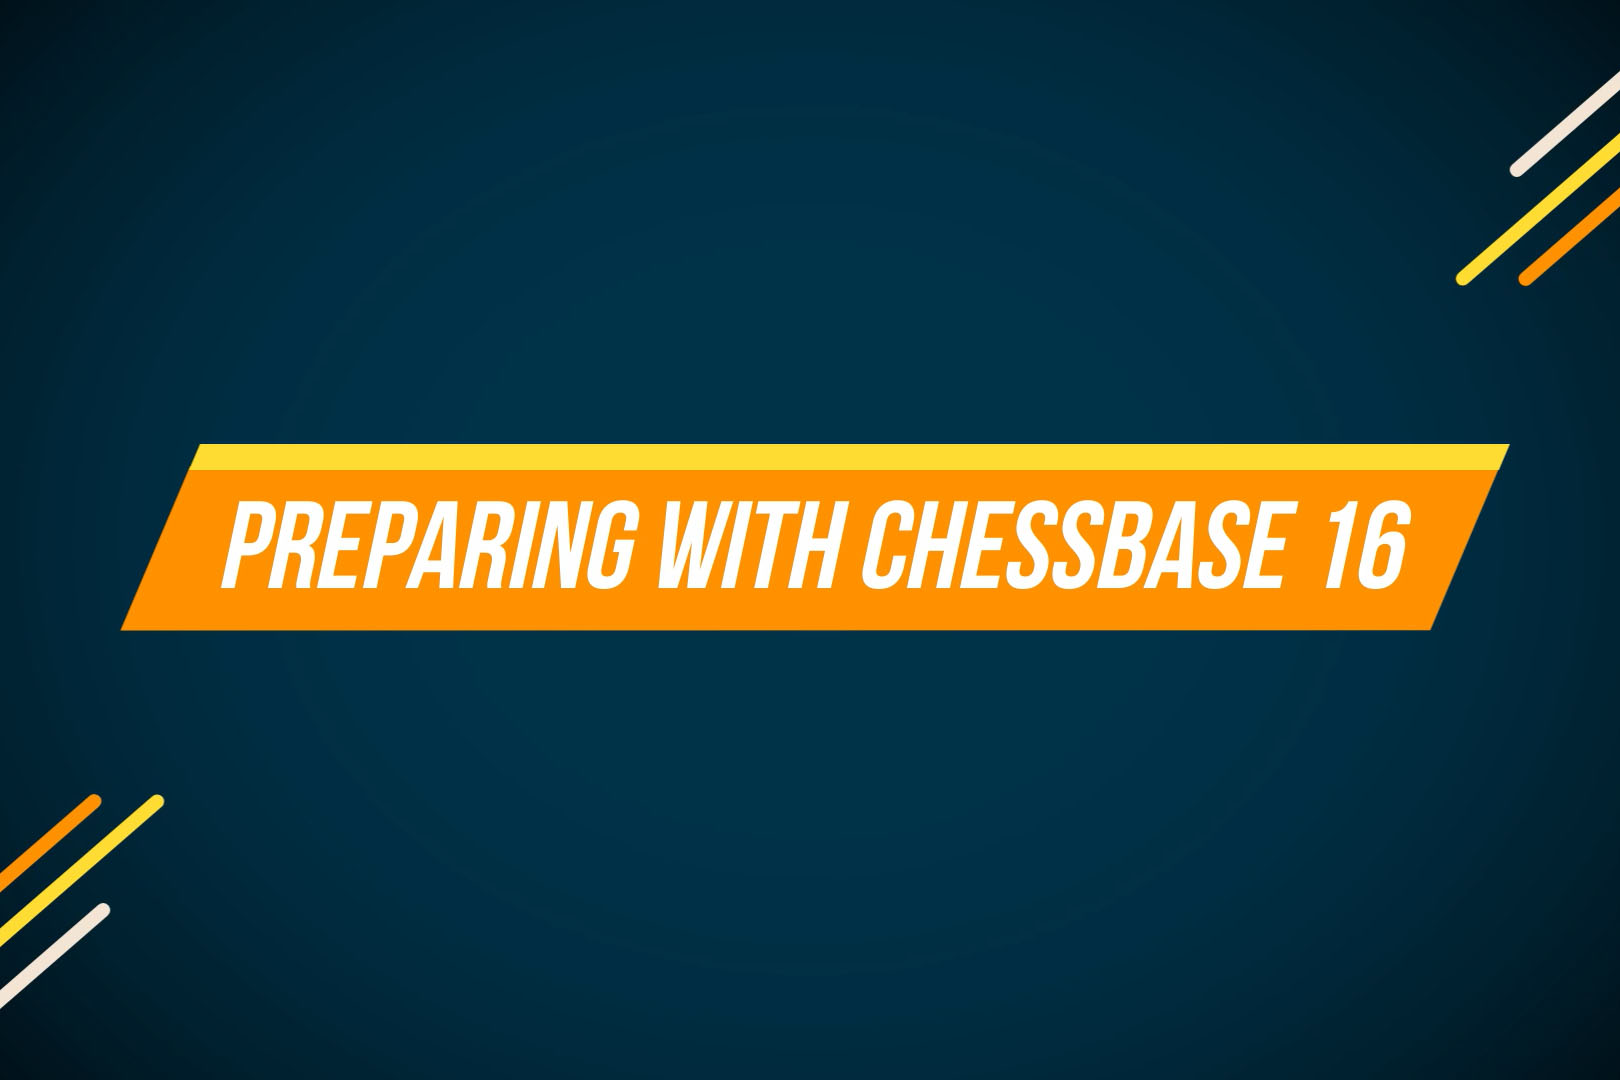 ChessBaseLive - Twitch